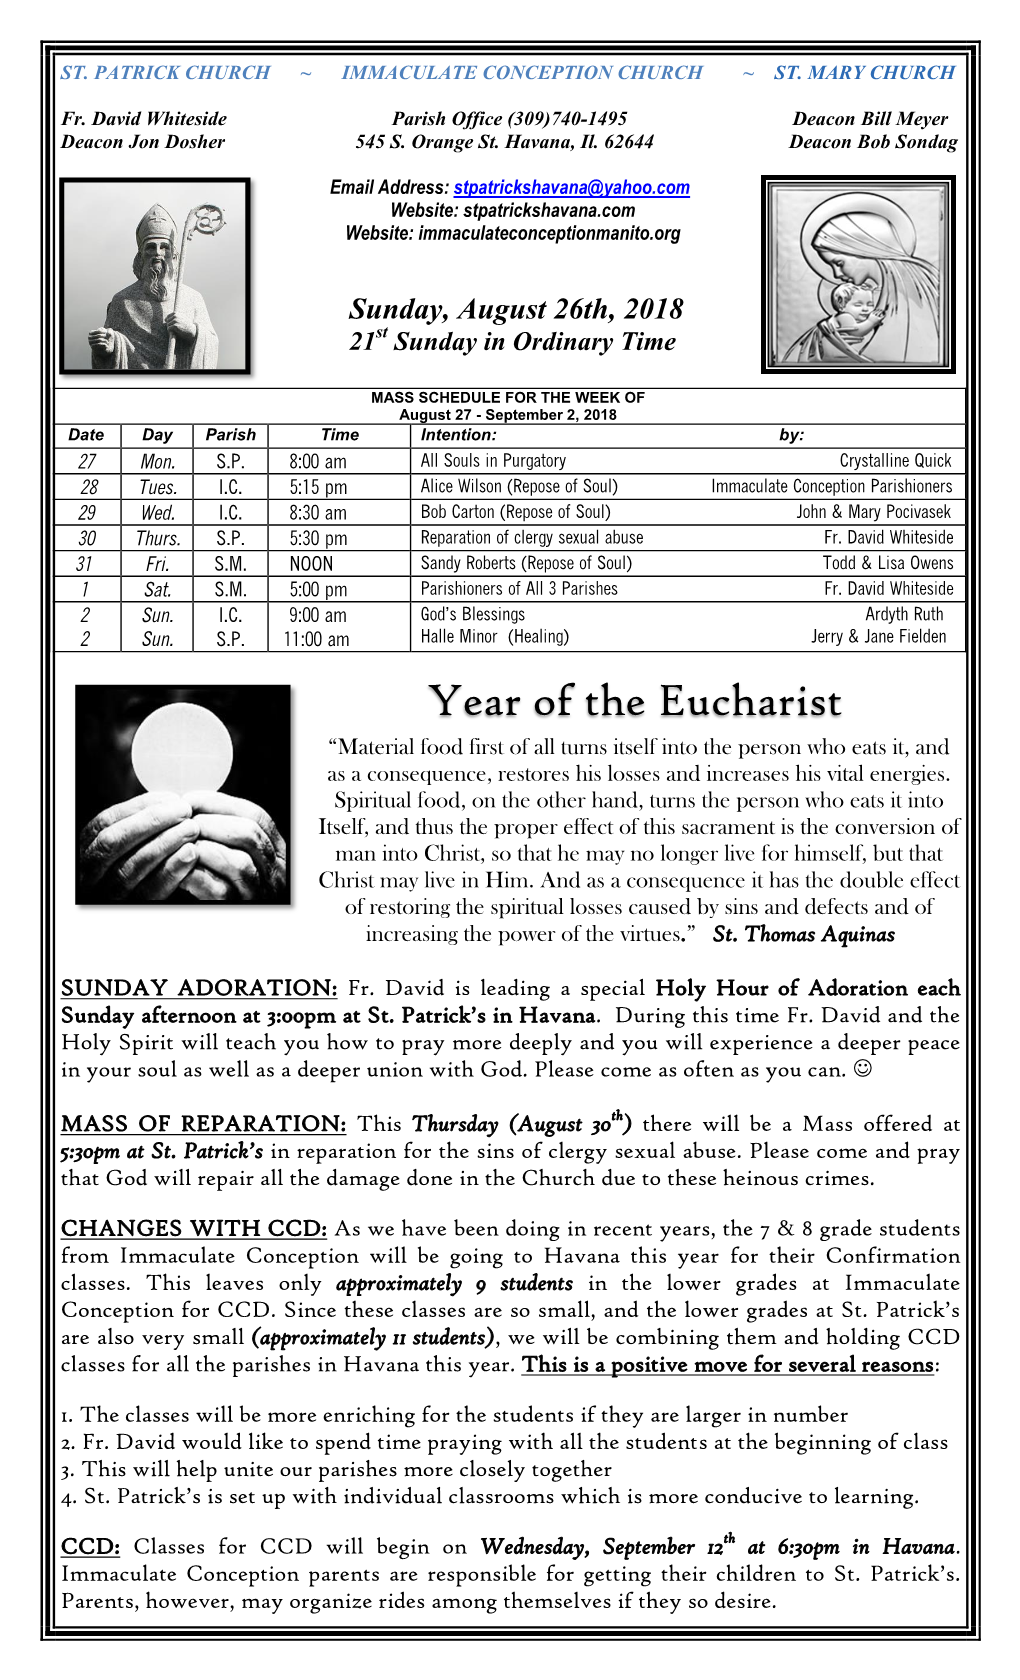 Year of the Eucharist “Material Food First of All Turns Itself Into the Person Who Eats It, and As a Consequence, Restores His Losses and Increases His Vital Energies